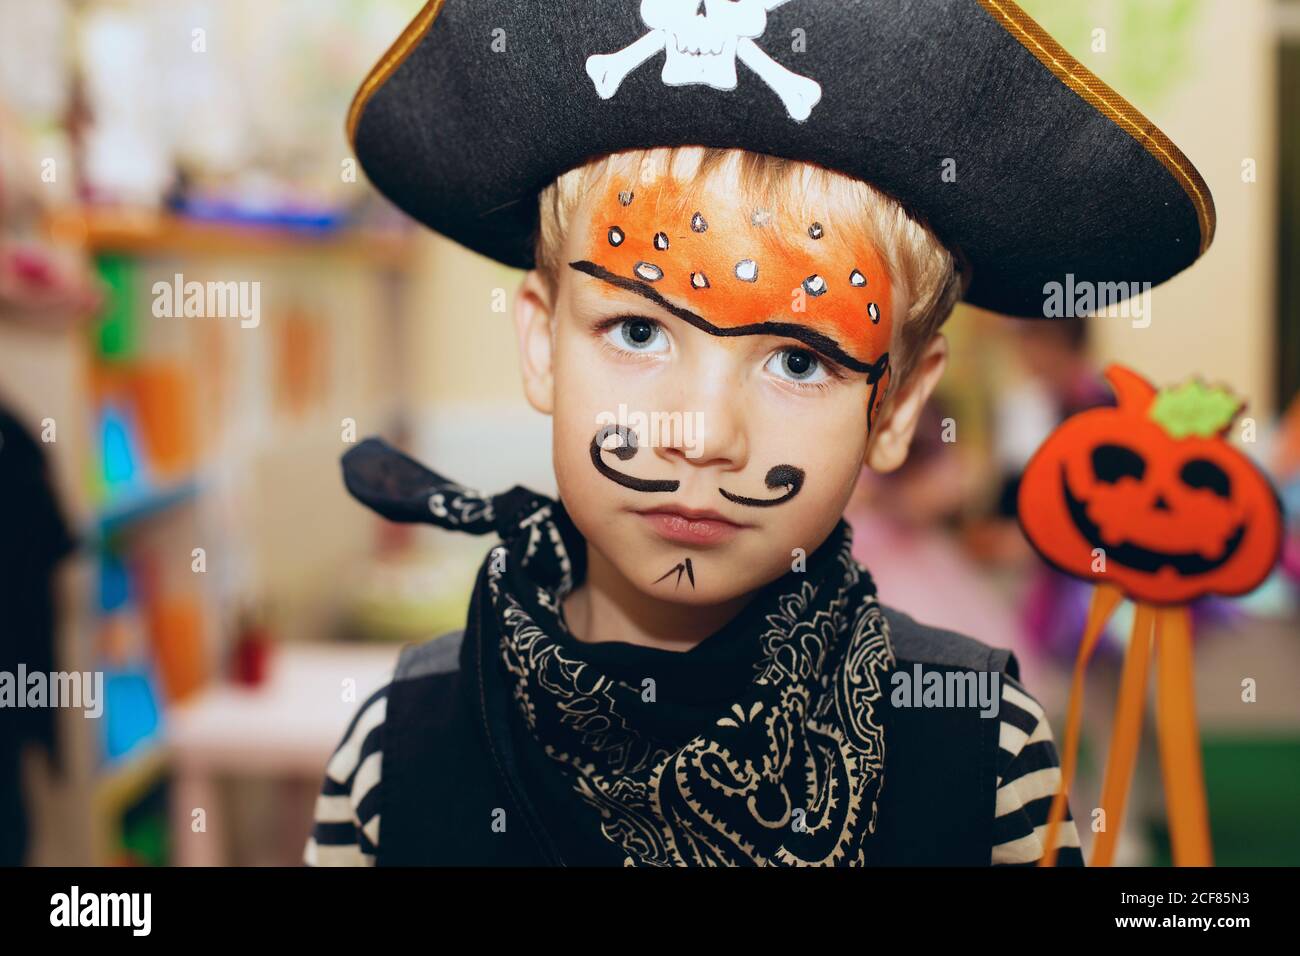 Halloween party. A little boy in a pirate costume and a makeup on his face is having good time at the Halloween party. Face painting kids Stock Photo - Alamy